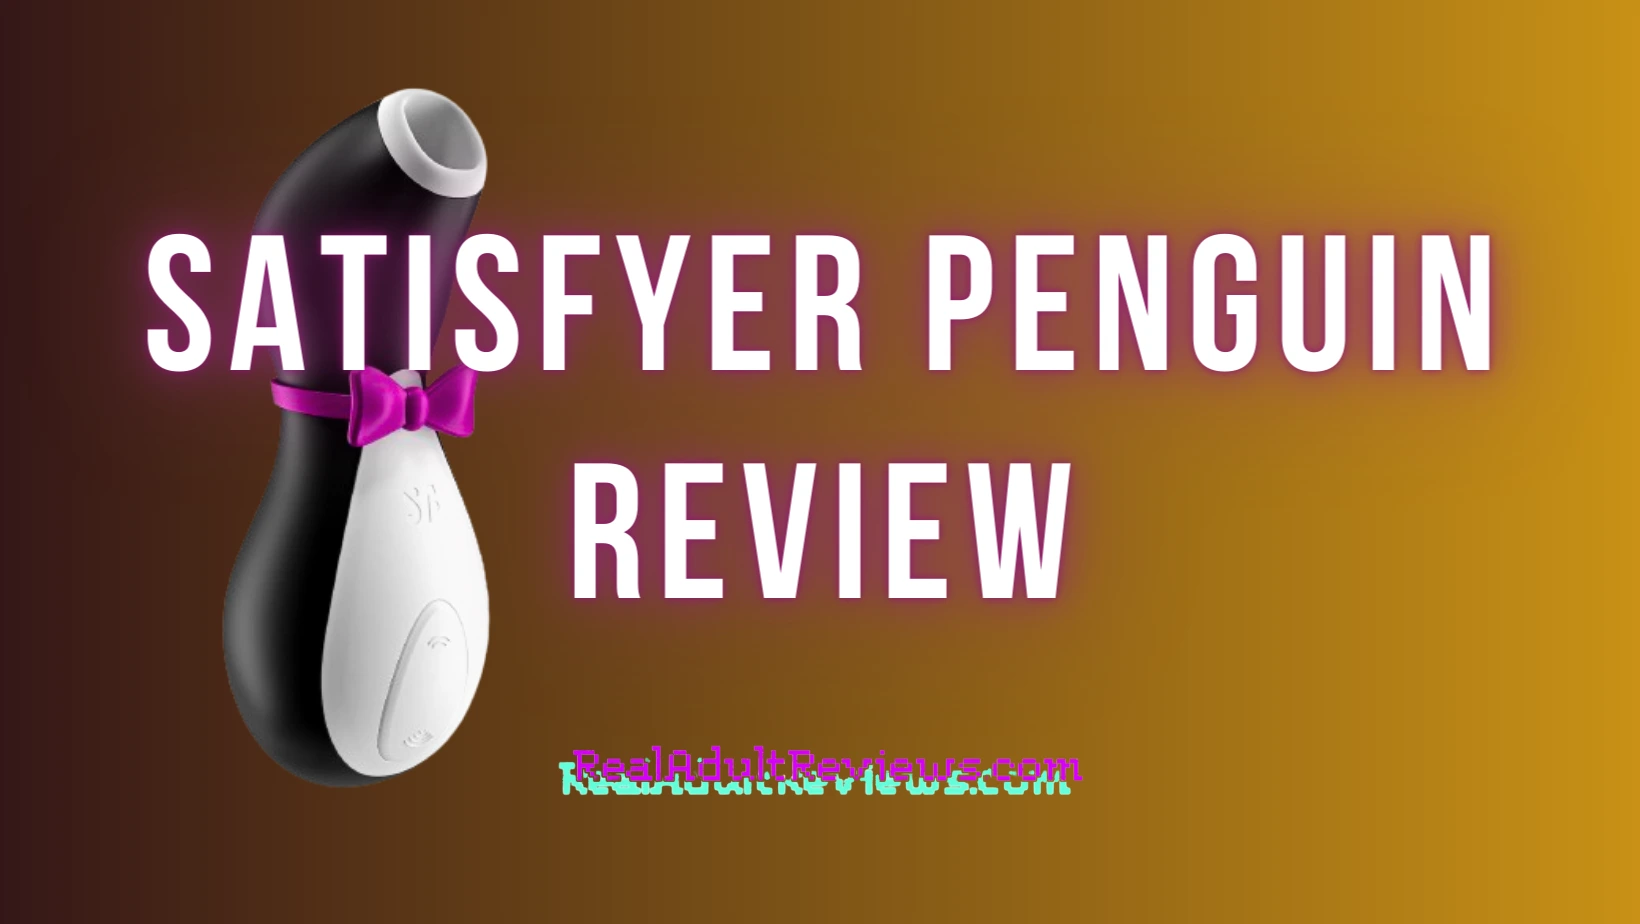 Looking For An Affordable Clitoral Vibrator? Satisfyer Penguin Pro Review